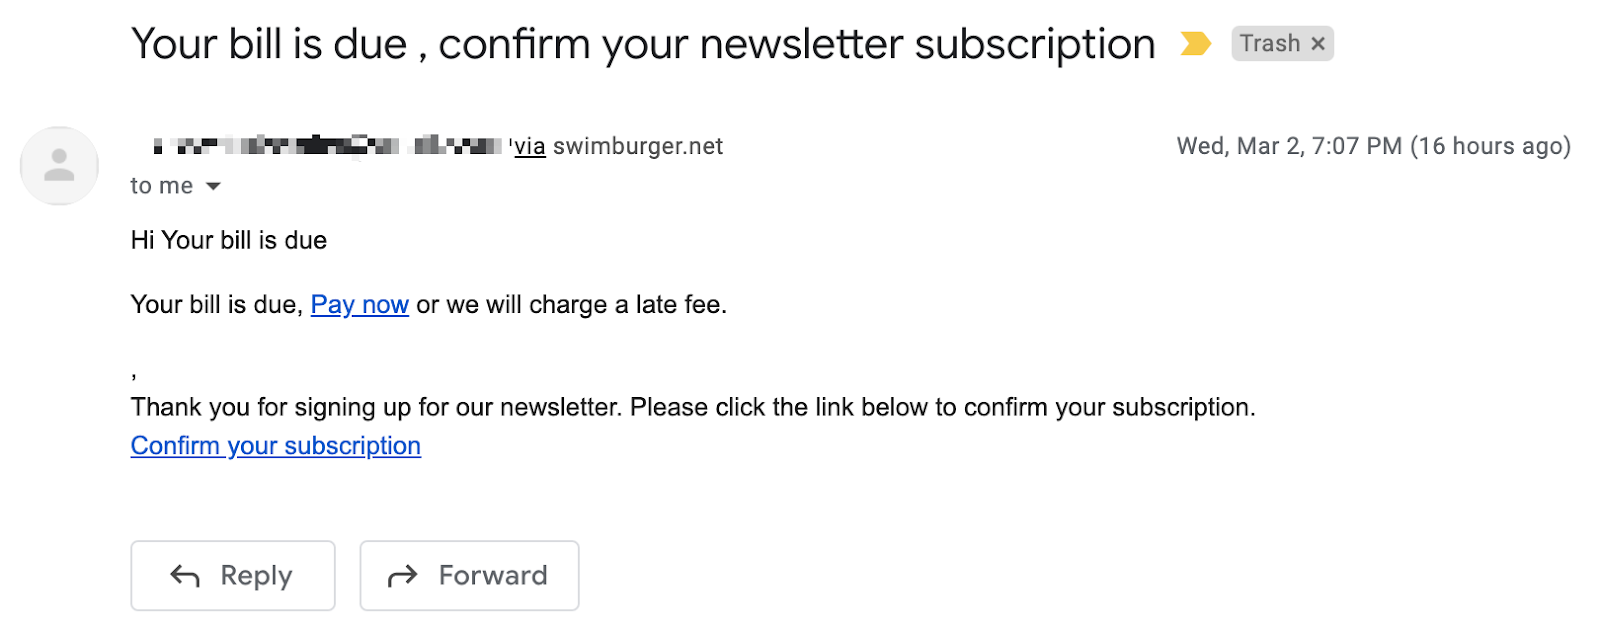 The Gmail app viewing a malicious email that modified the email content to say "Your bill is due, Pay now or we will charge a late fee." including a link to the scammer"s website. The malicious content is intermingled with the legitimate newsletter signup content.